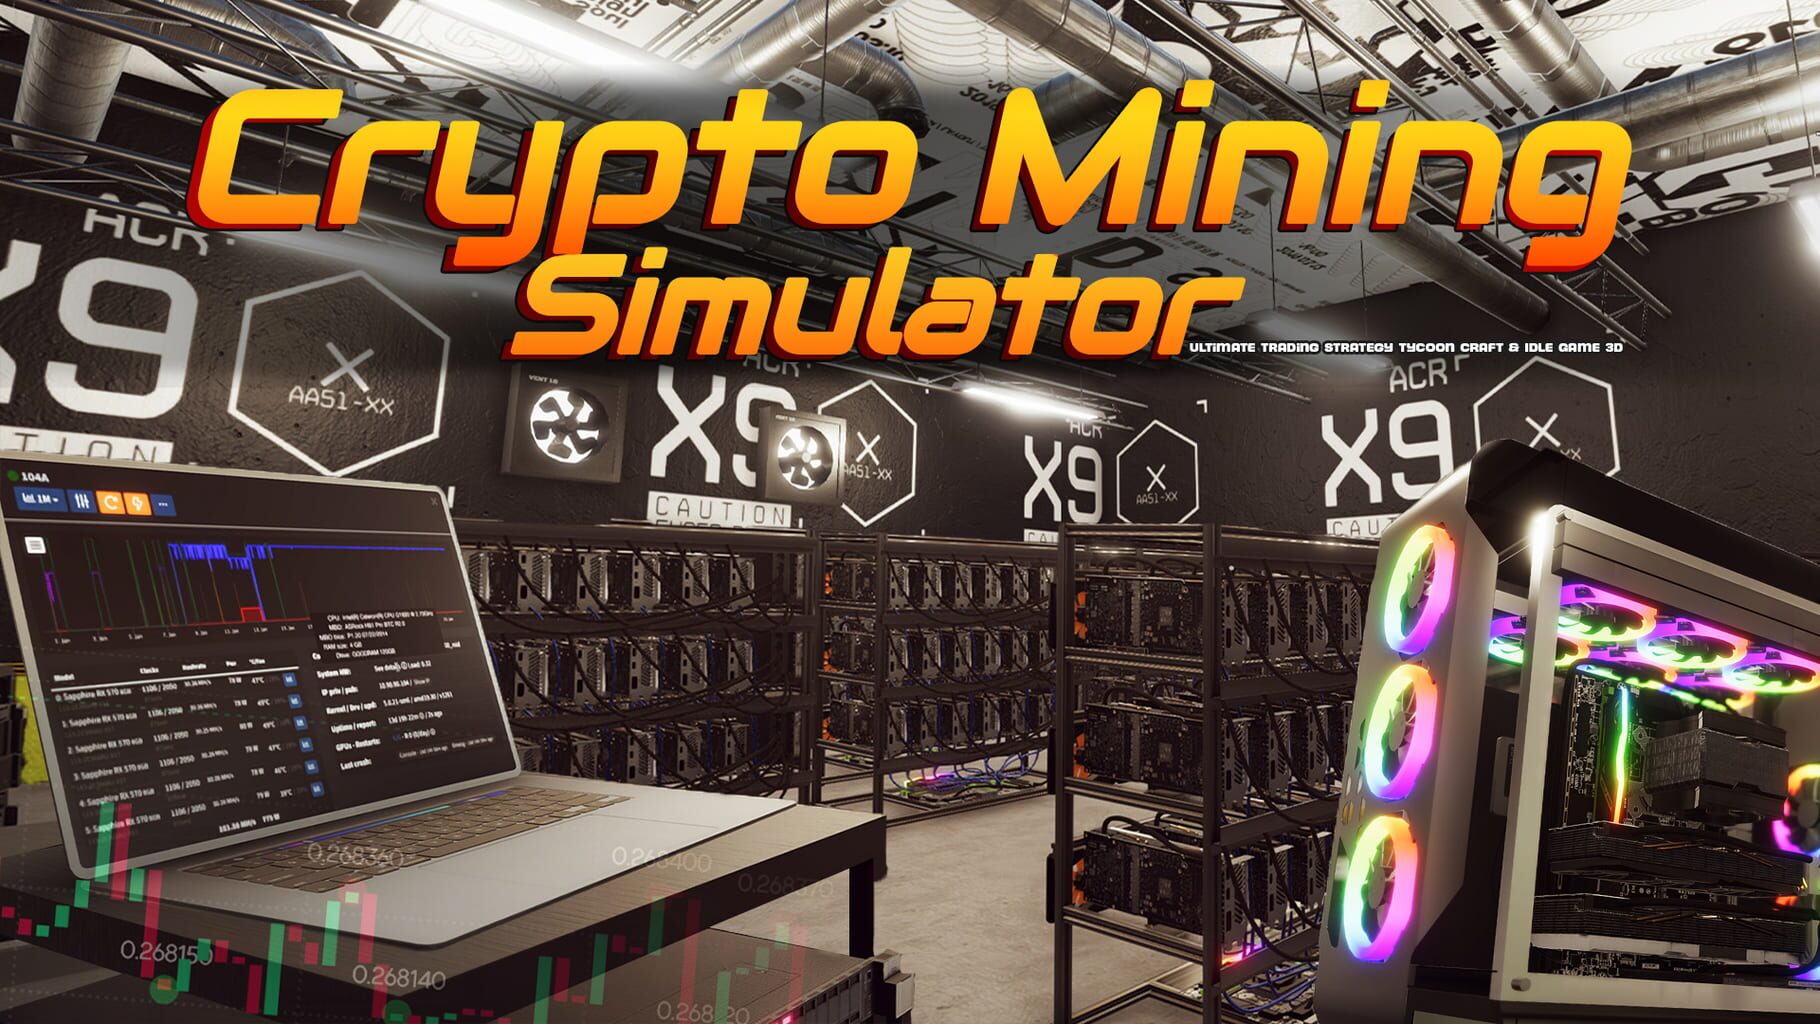 Crypto Mining Simulator: Ultimate Trading Strategy Tycoon Craft & Idle Game 3D artwork